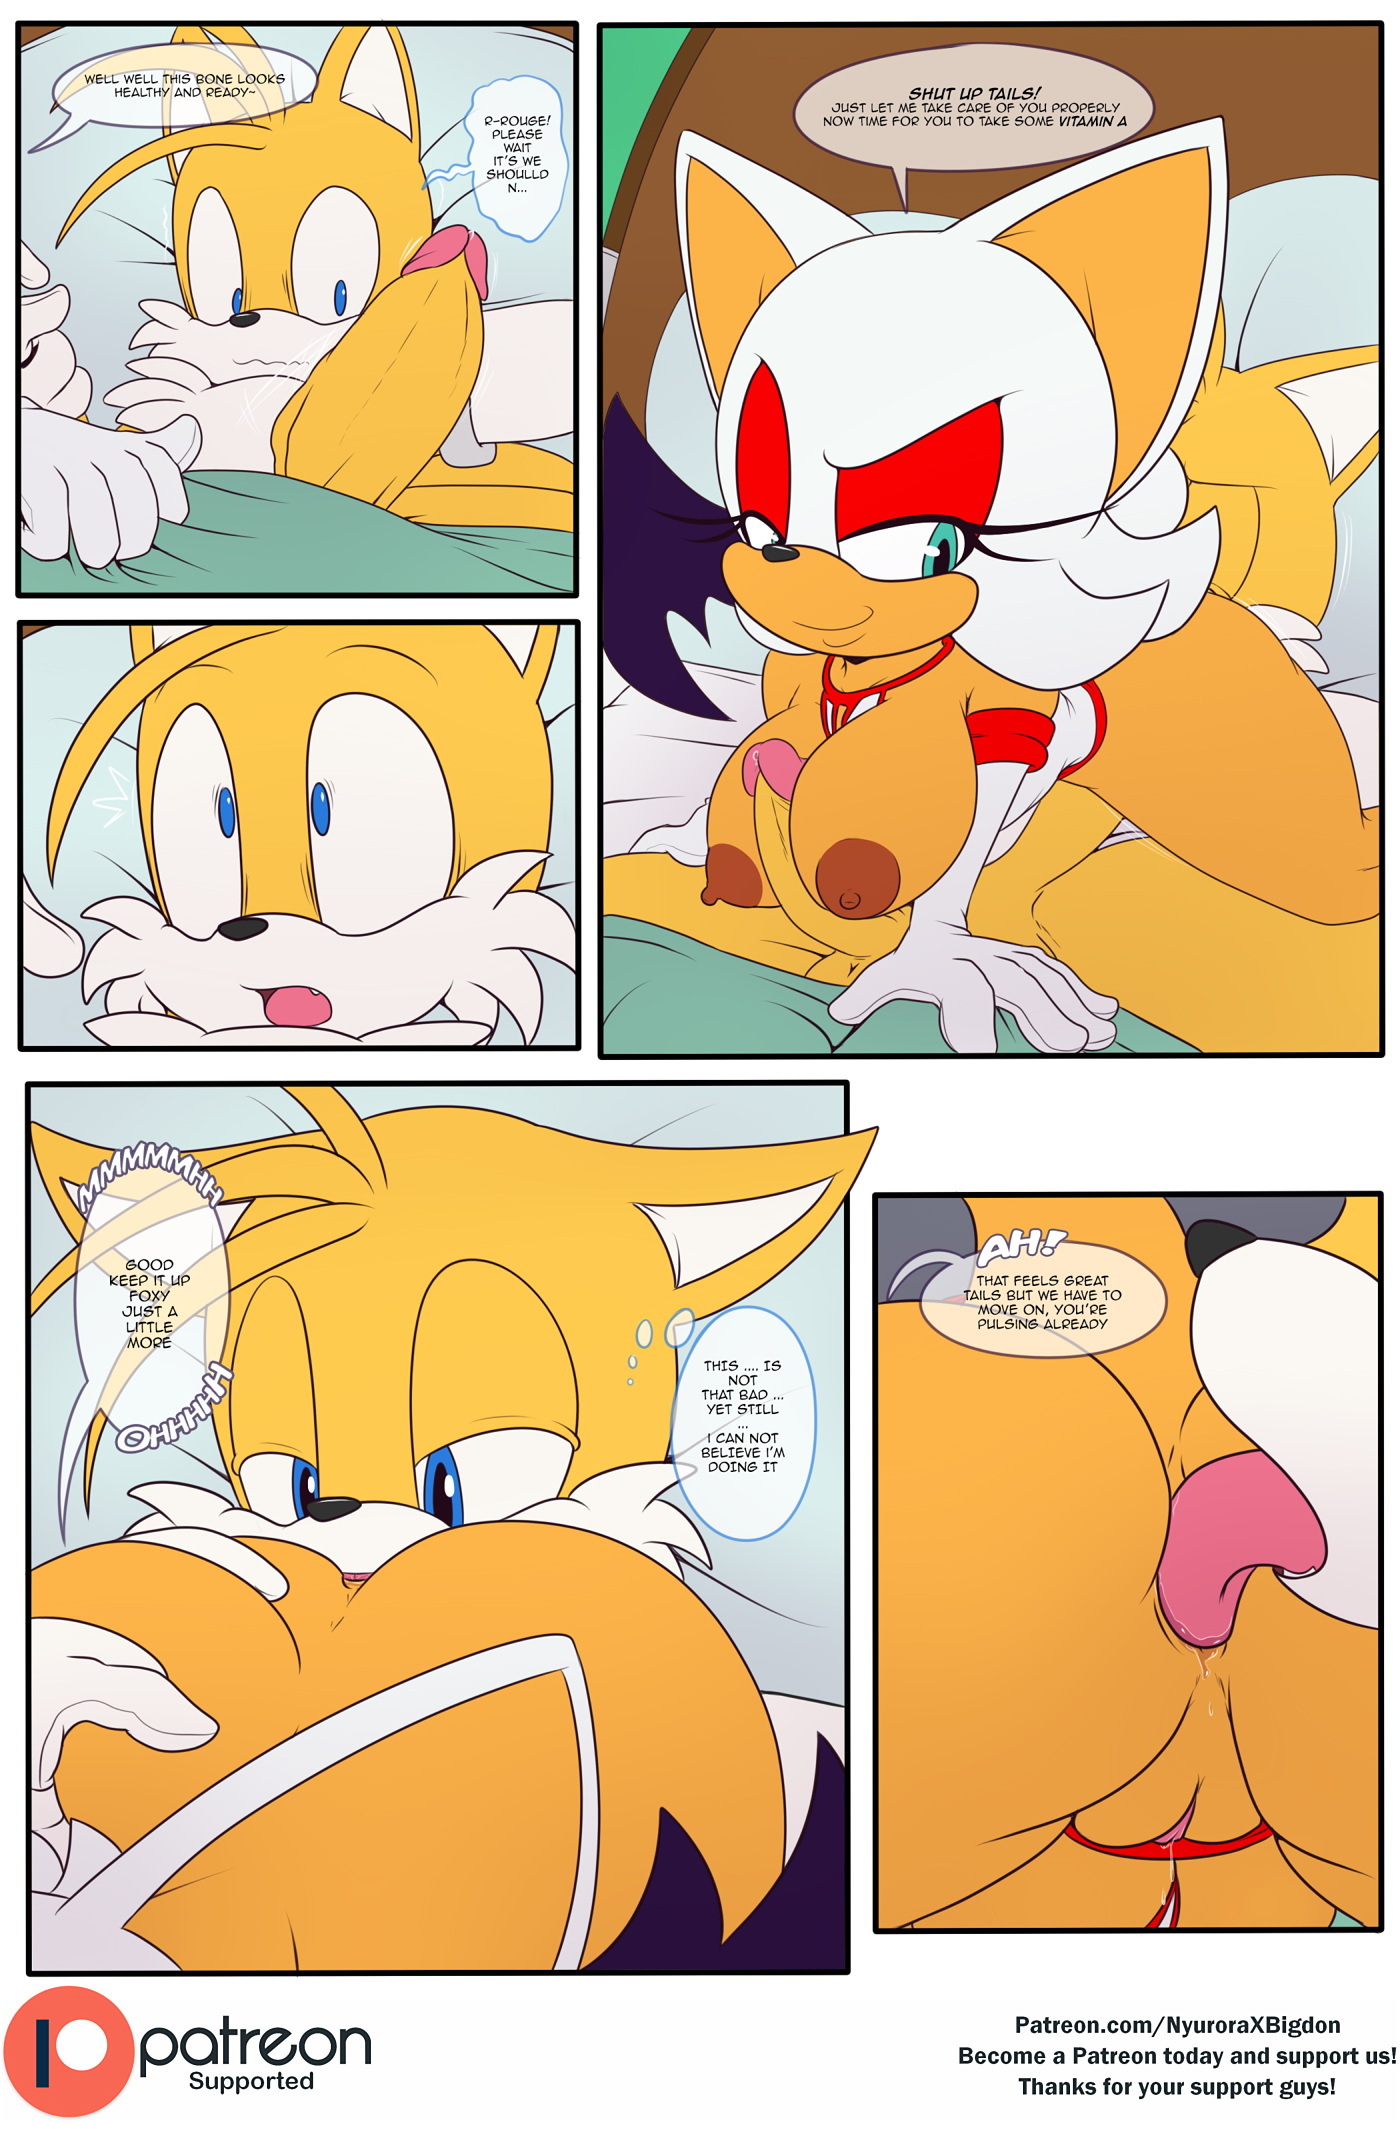 Tail's Treatment - Page 2